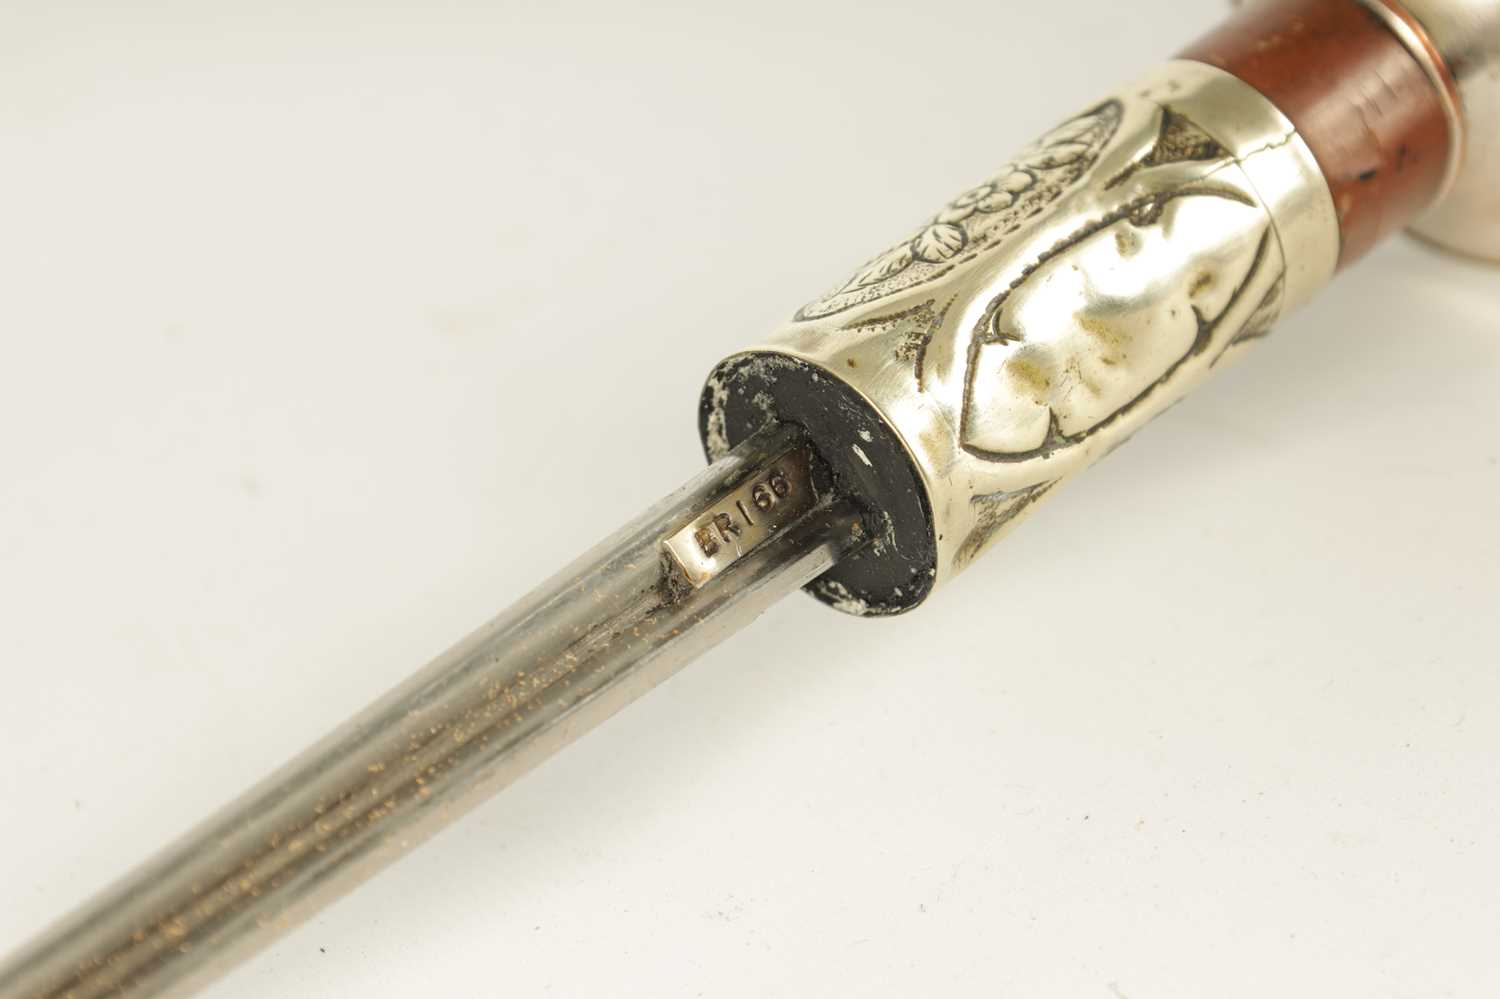 AN ART NOUVEAU MALACCA AND SILVER METAL SWORD STICK - Image 7 of 7